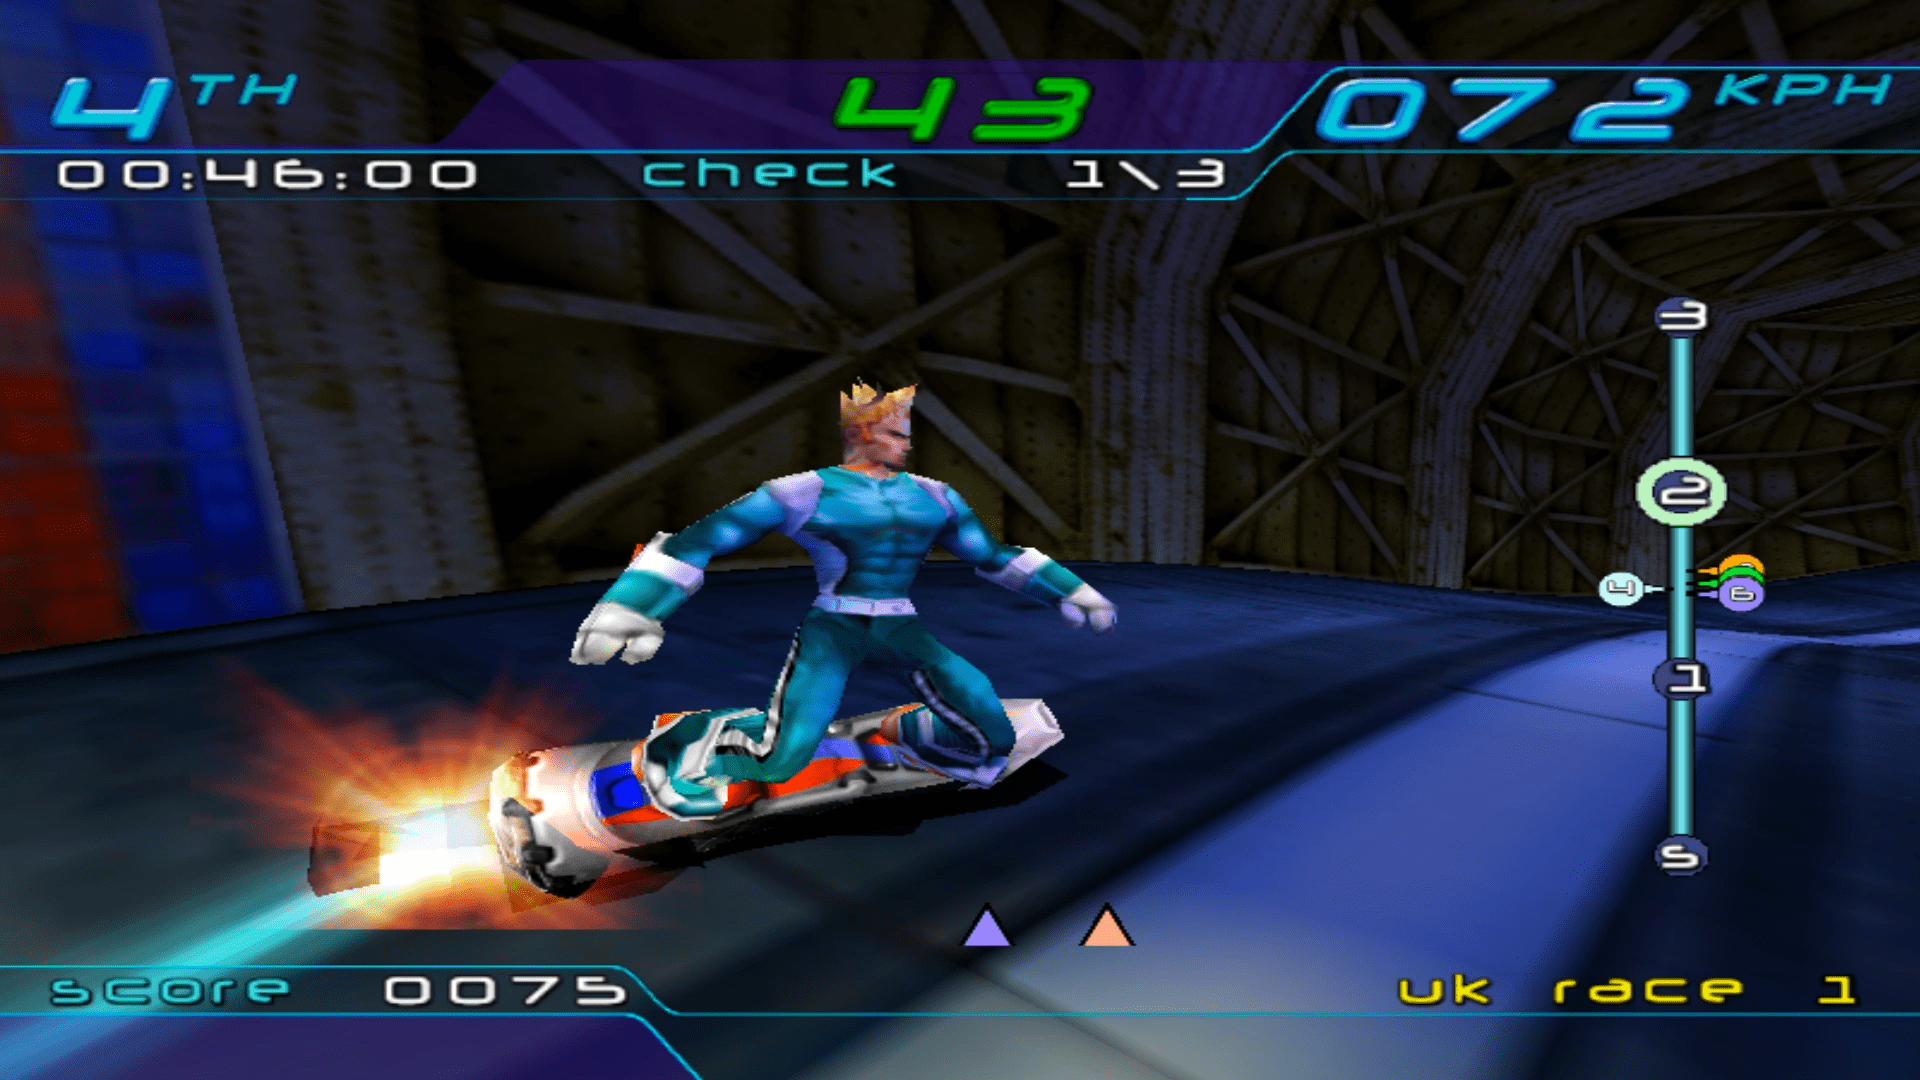 Classic Dreamcast future sport title ‘TrickStyle’ coming to Steam this month